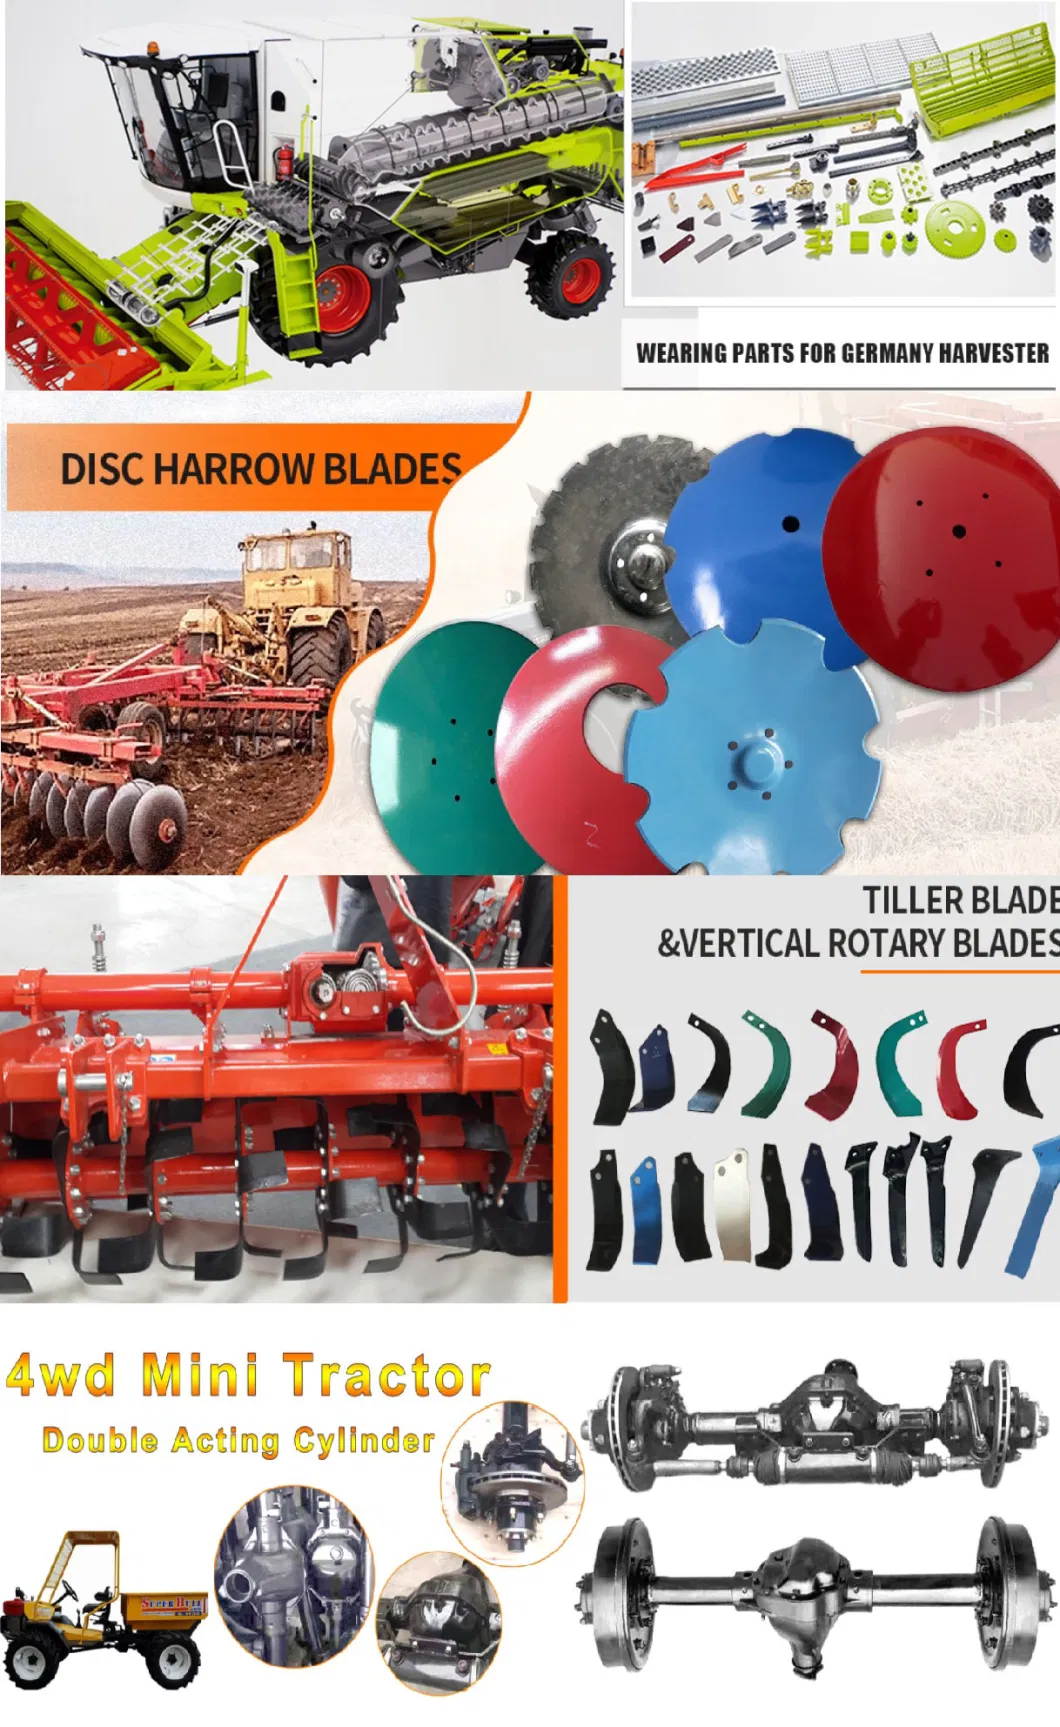 Agricultural Agri AG Agriculture Part for Machine Spare Tiller Wheel Hube End Yoke Trailer Tractor Farm Equipment Rotary Combine Harvester Mower Pto Shaft